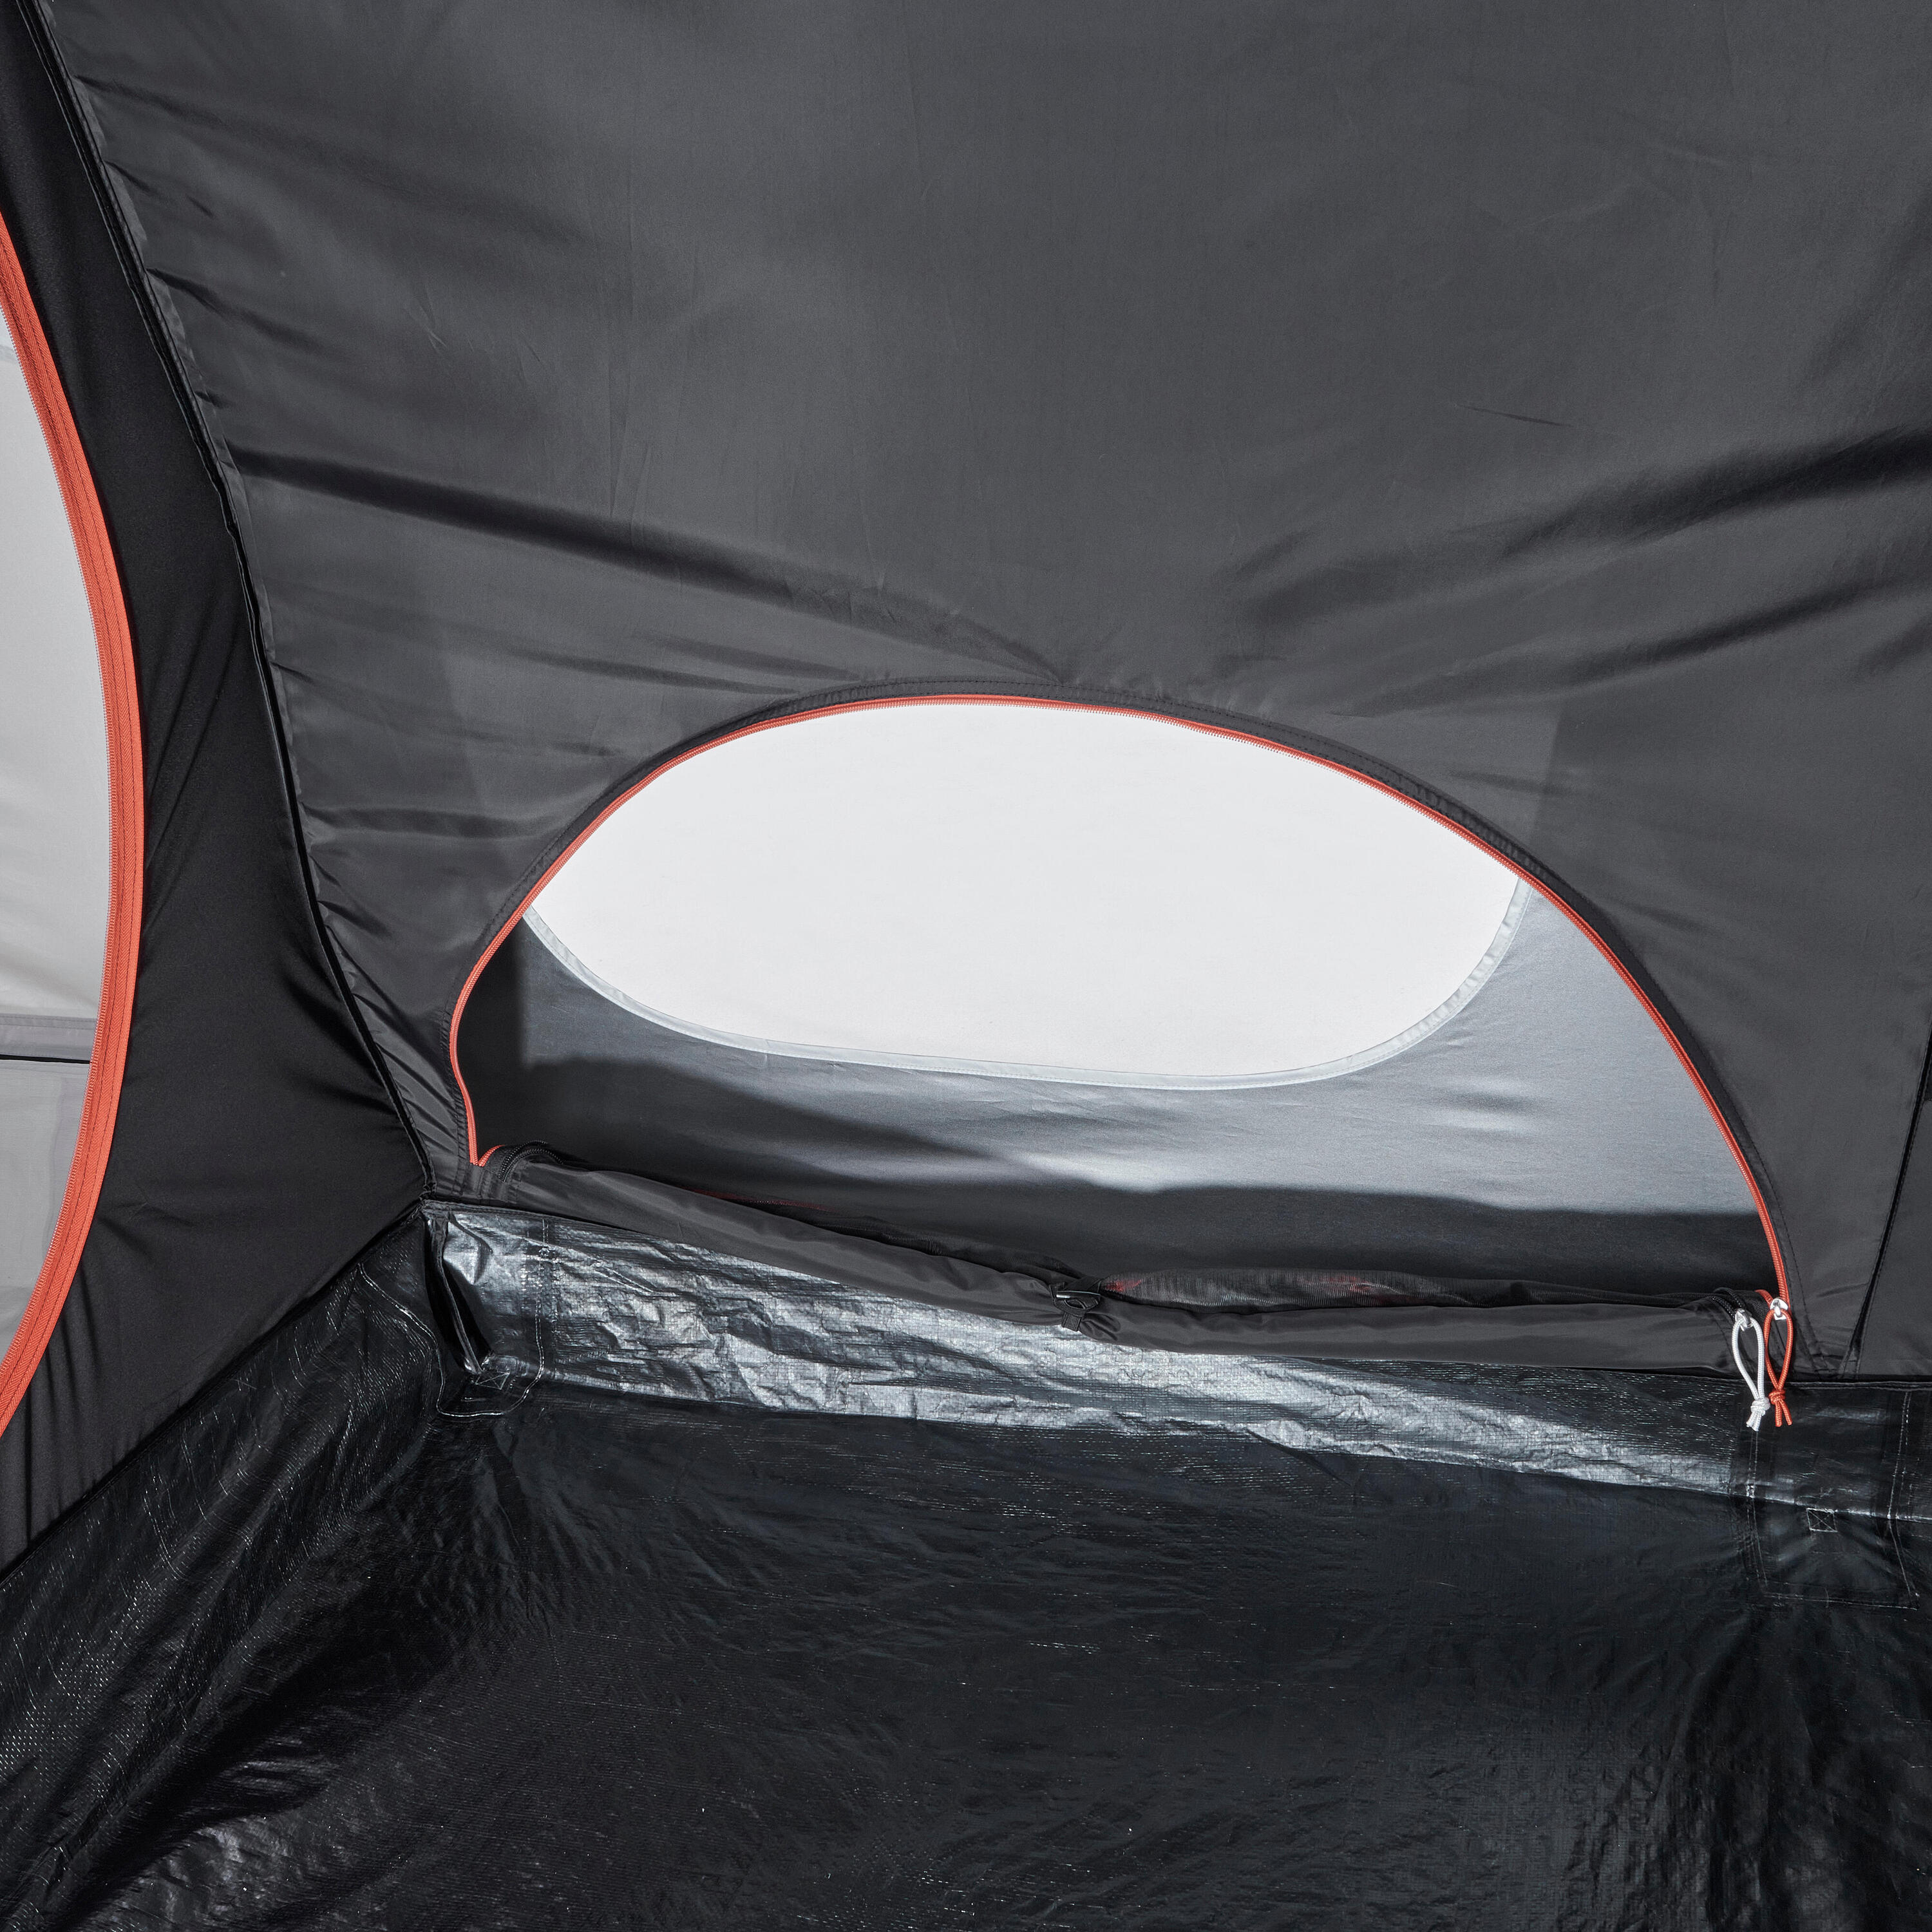 Inflatable camping tent - Air Seconds 5.2 F&B - 5 People - 2 Inner tubes 29/35